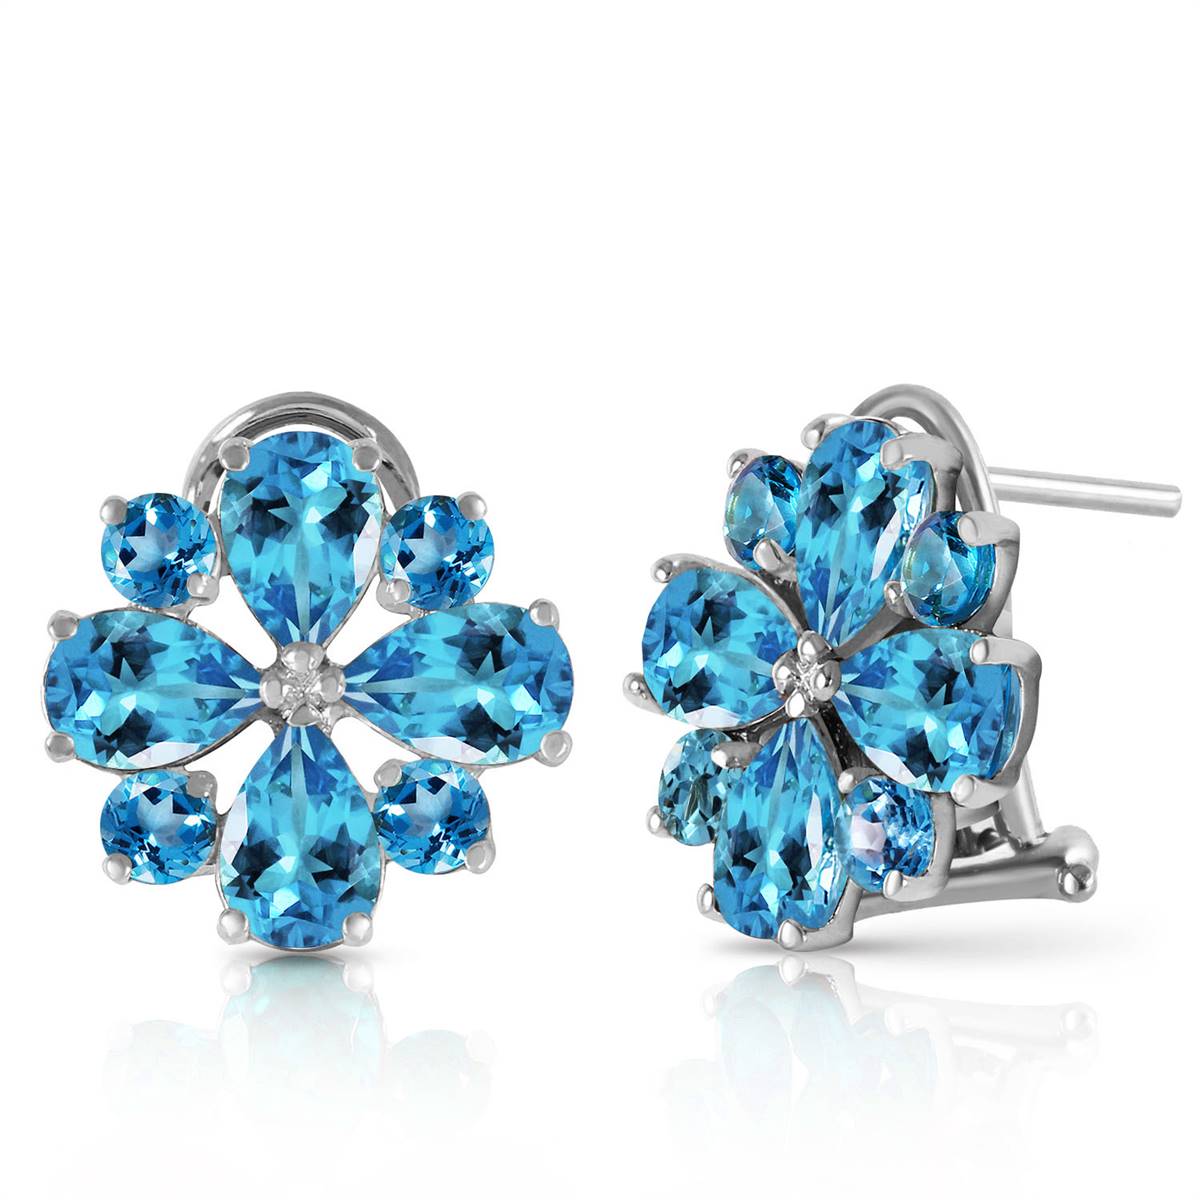 4.85 Carat 14K Solid White Gold Renowned Blue Topaz Earrings